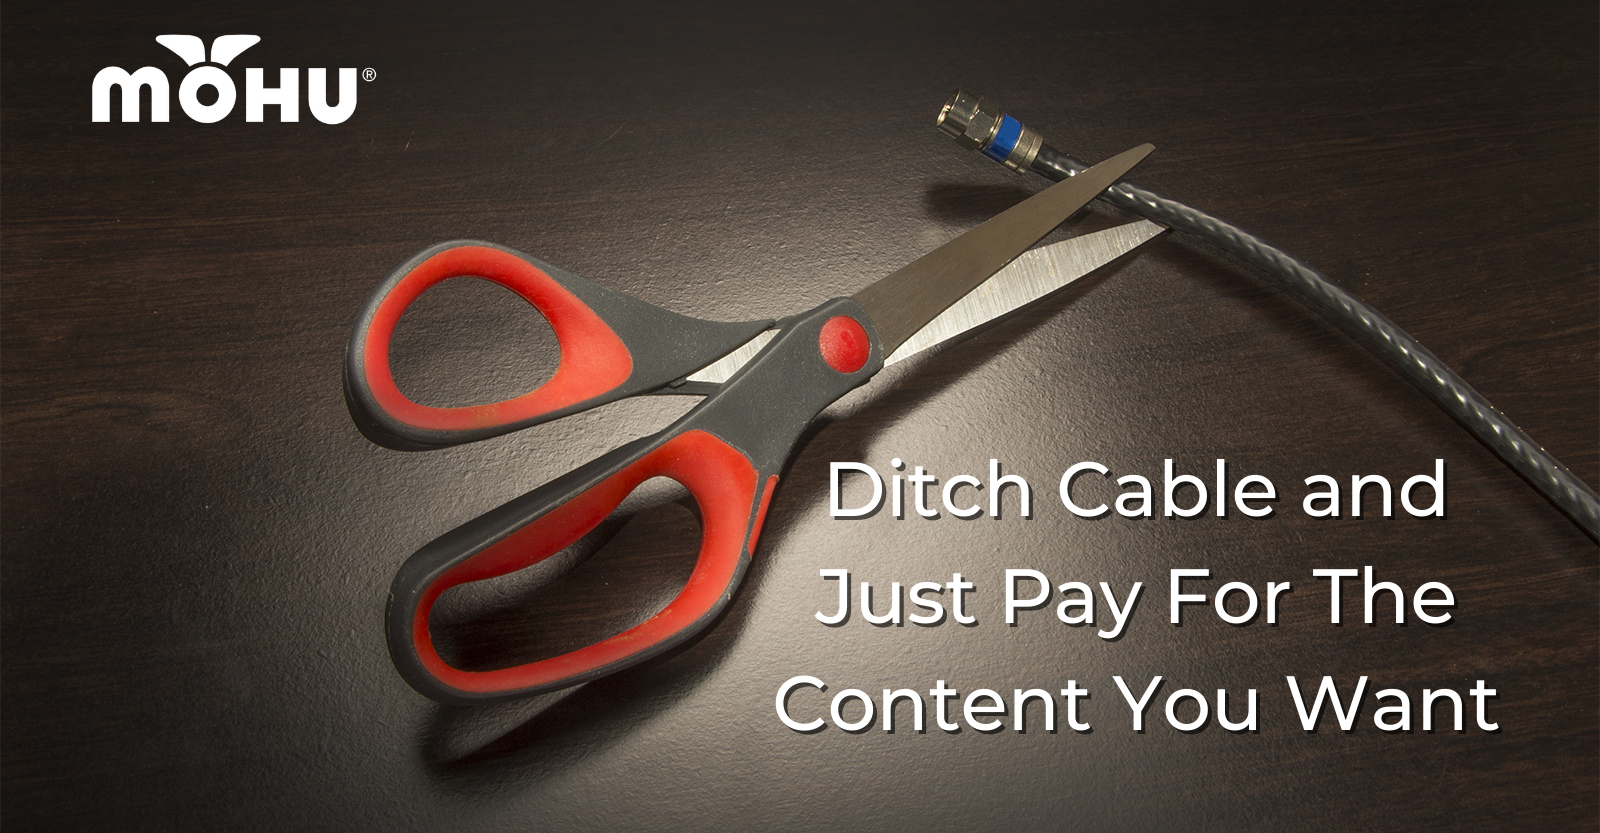 Pair of scissors cutting a coax cable, Ditch Cable and Just Pay For The Content You Want, Mohu logo